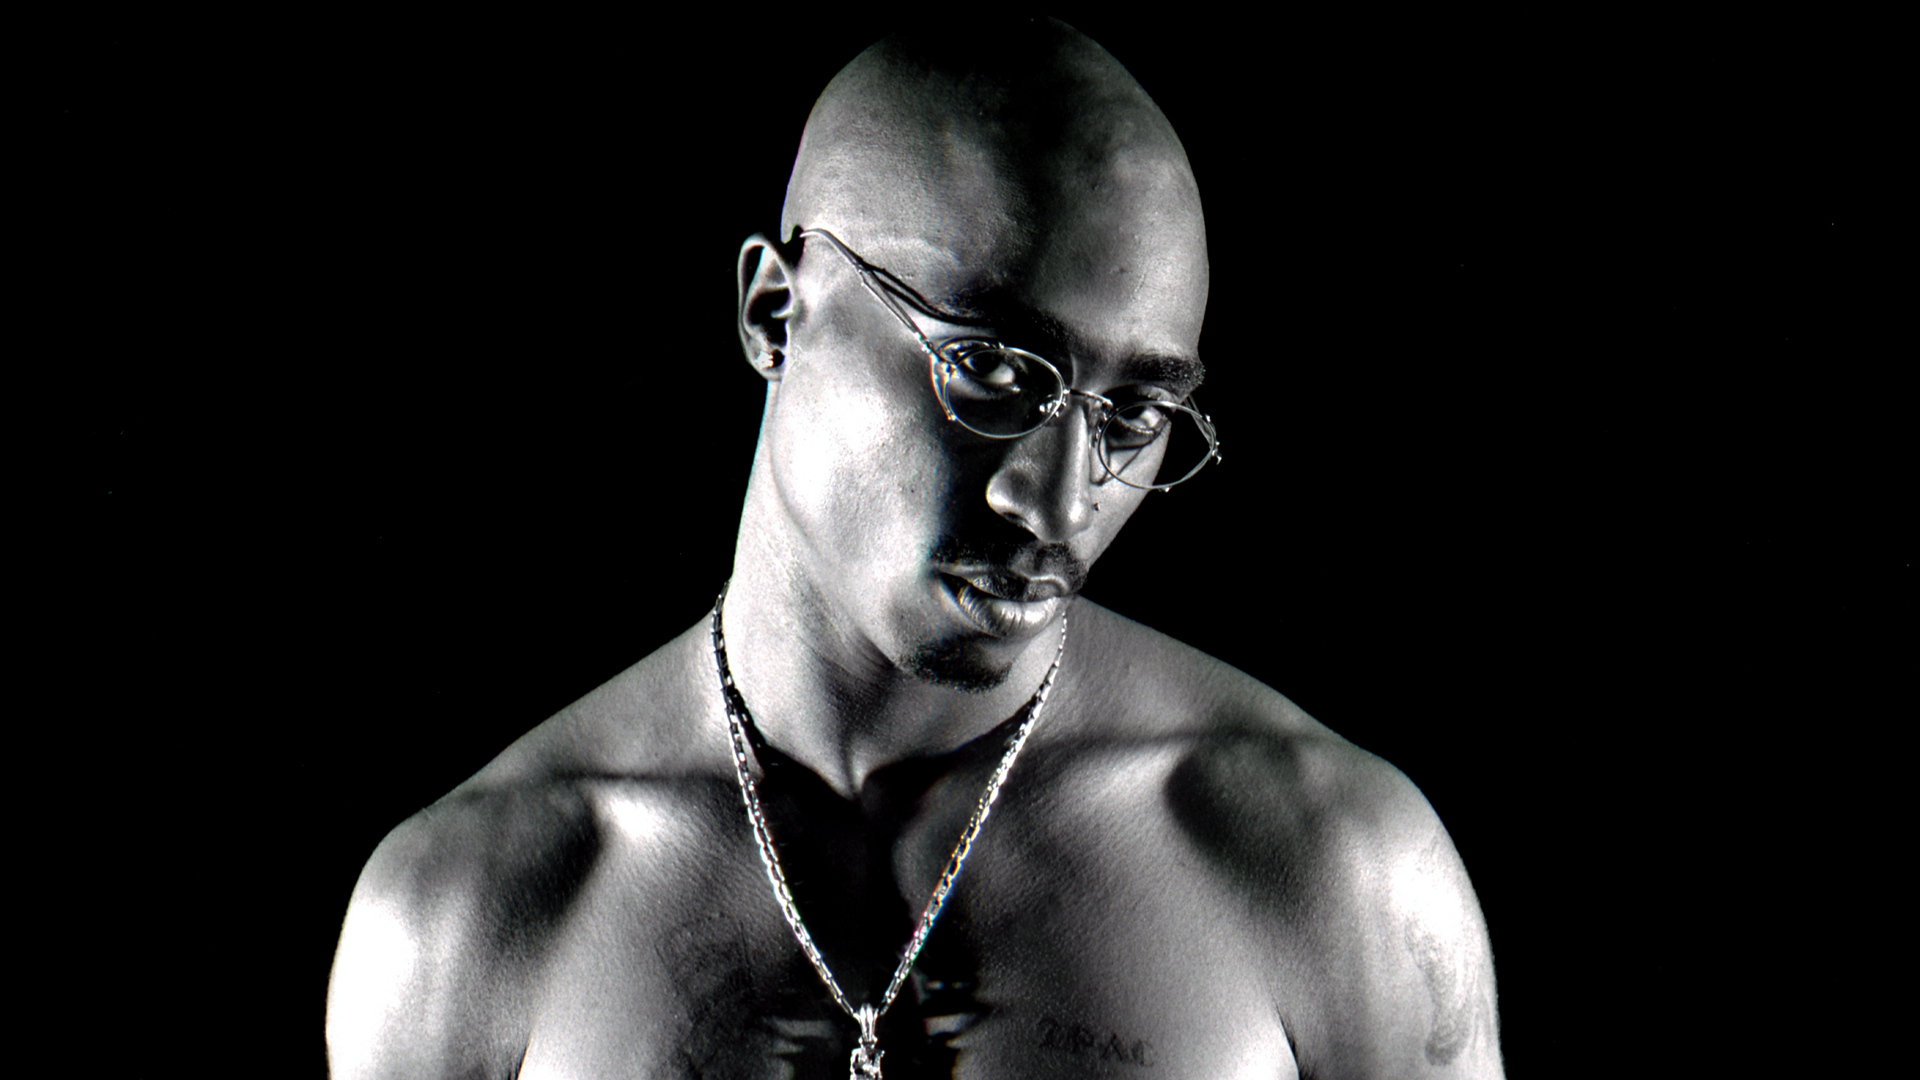 2560x1080 Tupac 2pac Rapper 2560x1080 Resolution Wallpaper Hd Music 4k Wallpapers Images Photos And Background Wallpapers Den